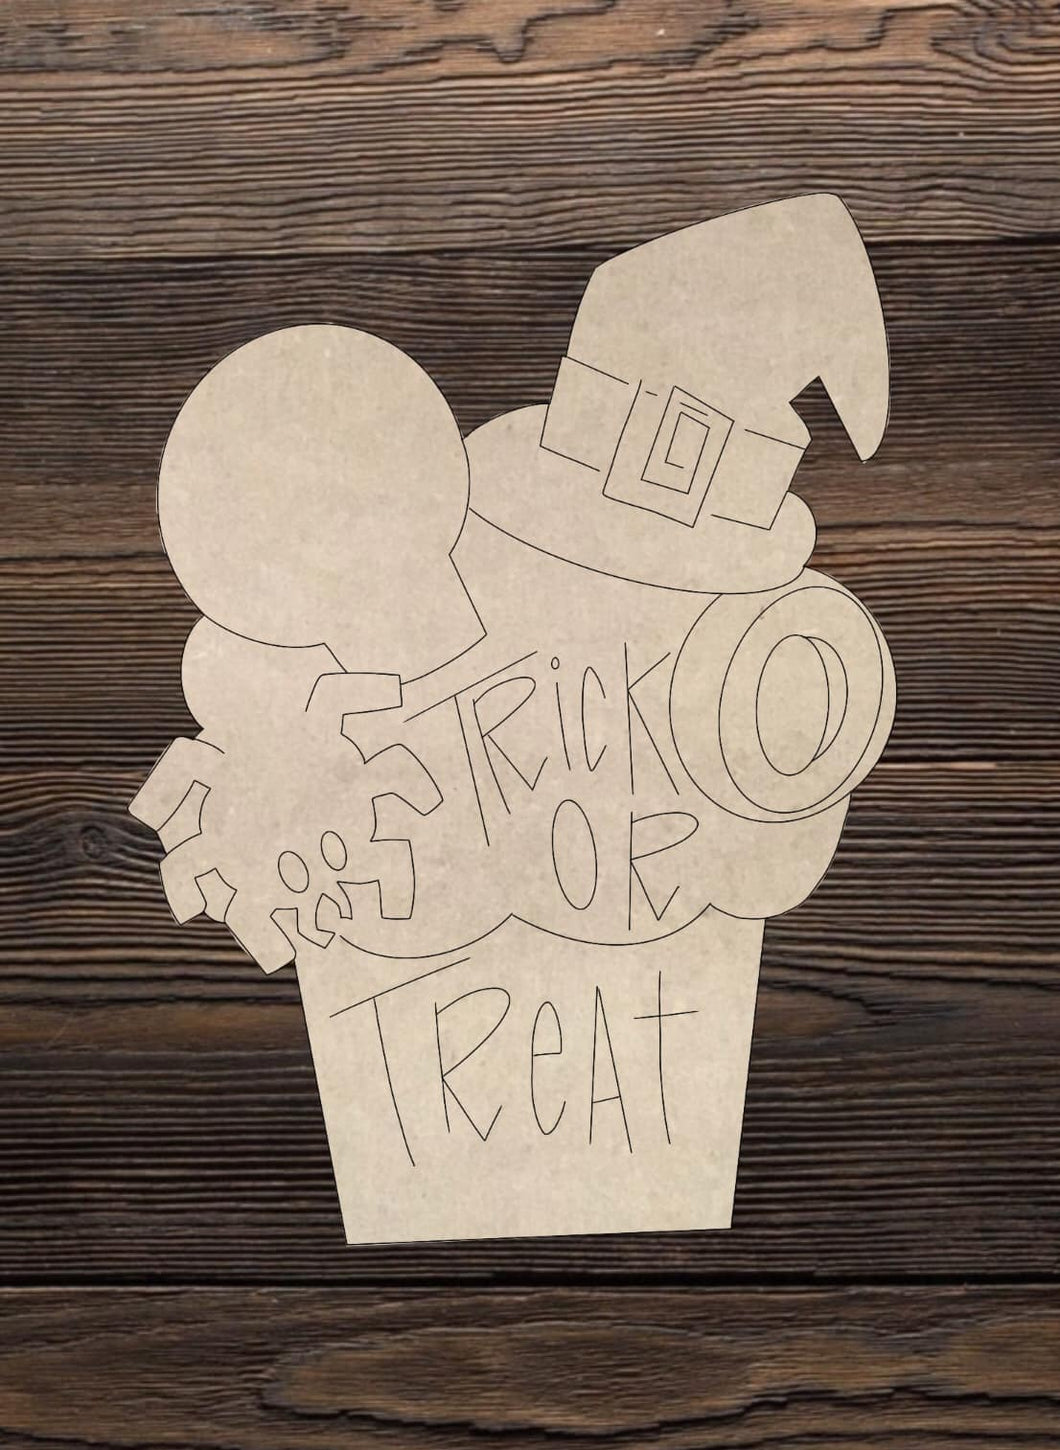 Cut and Traced Trick or Treat with Spider, Skull and Witch hat